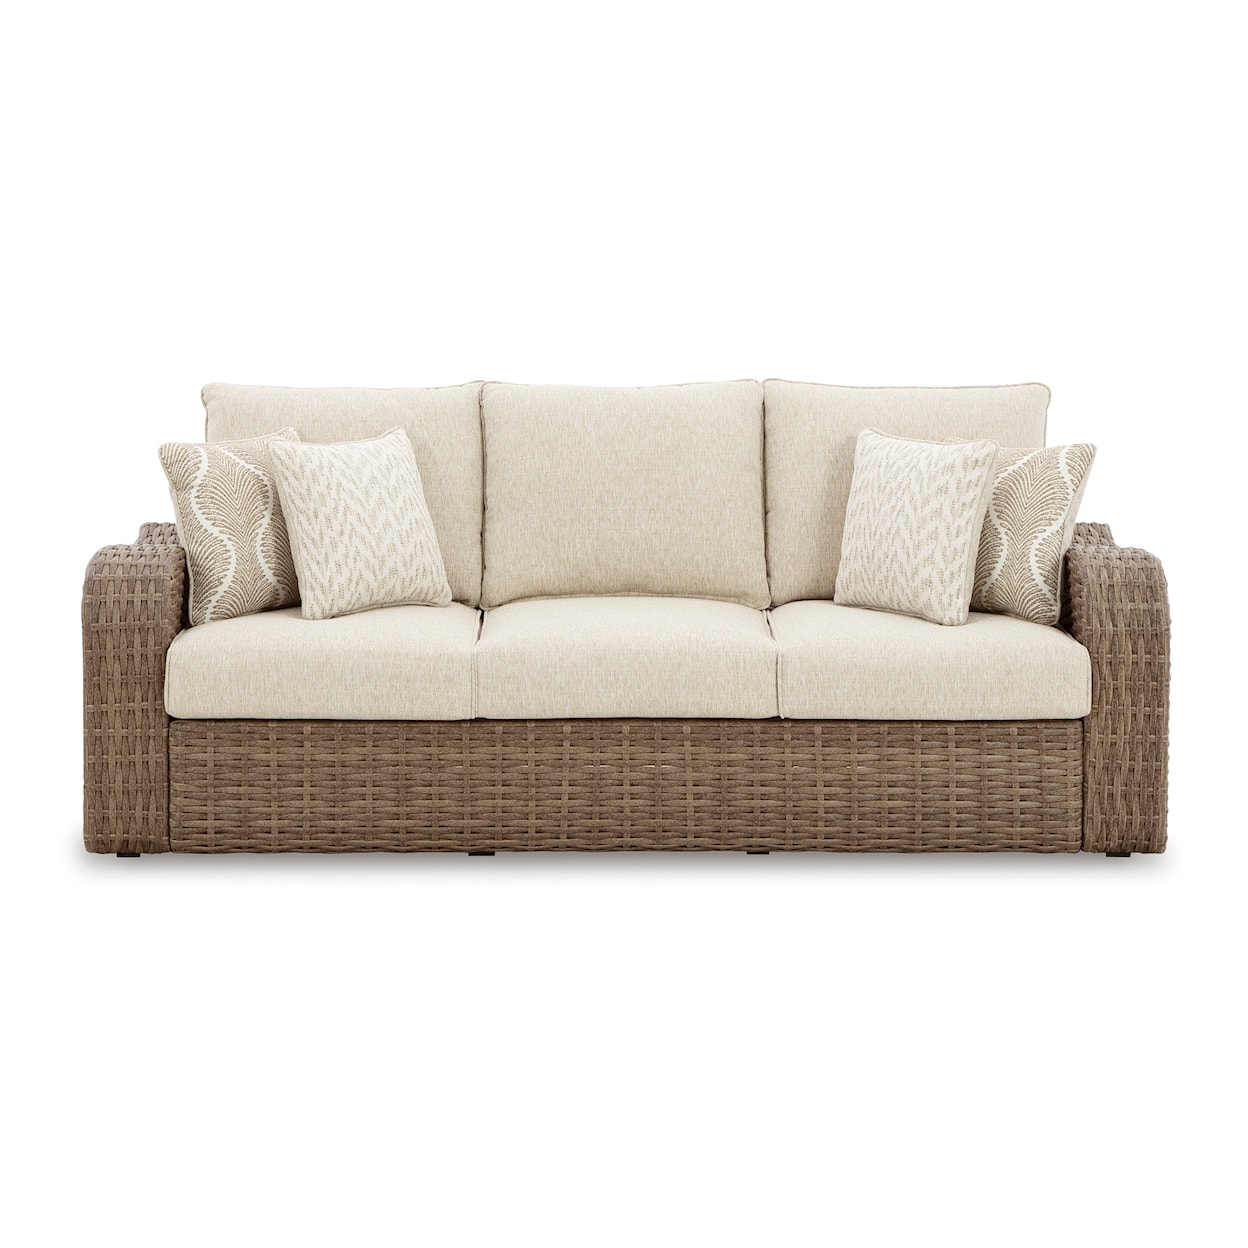 Signature Design Sandy Bloom Outdoor Sofa with Cushion